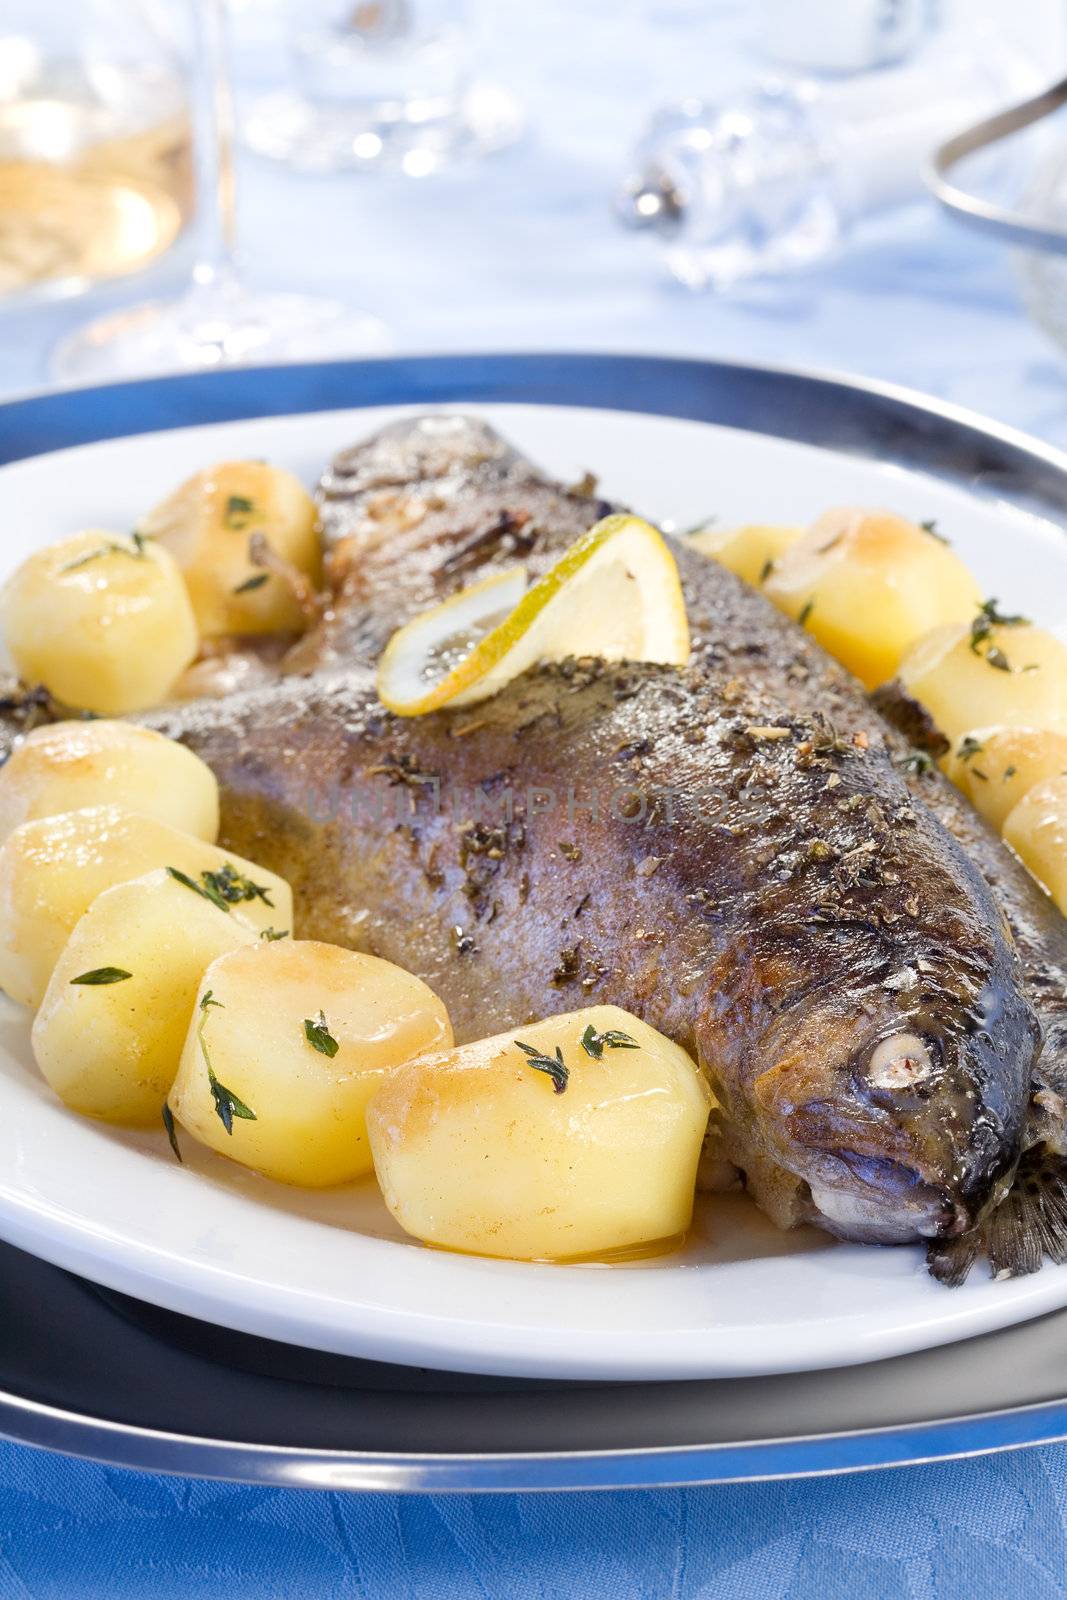 Baked trout by Gravicapa